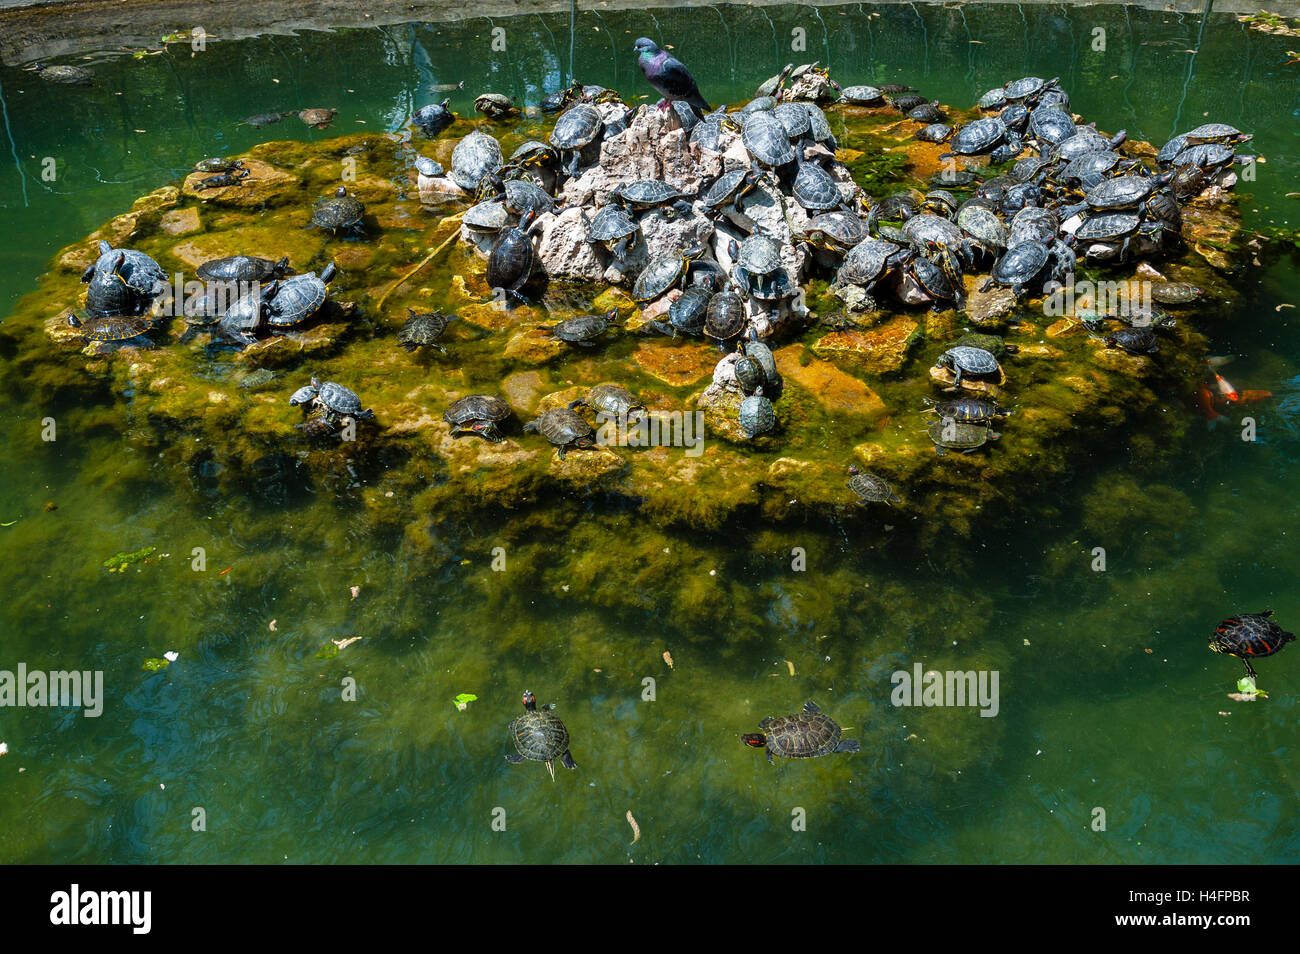 Athens, Greece. The National Garden is a large public park. Turtles in a pool. Stock Photo